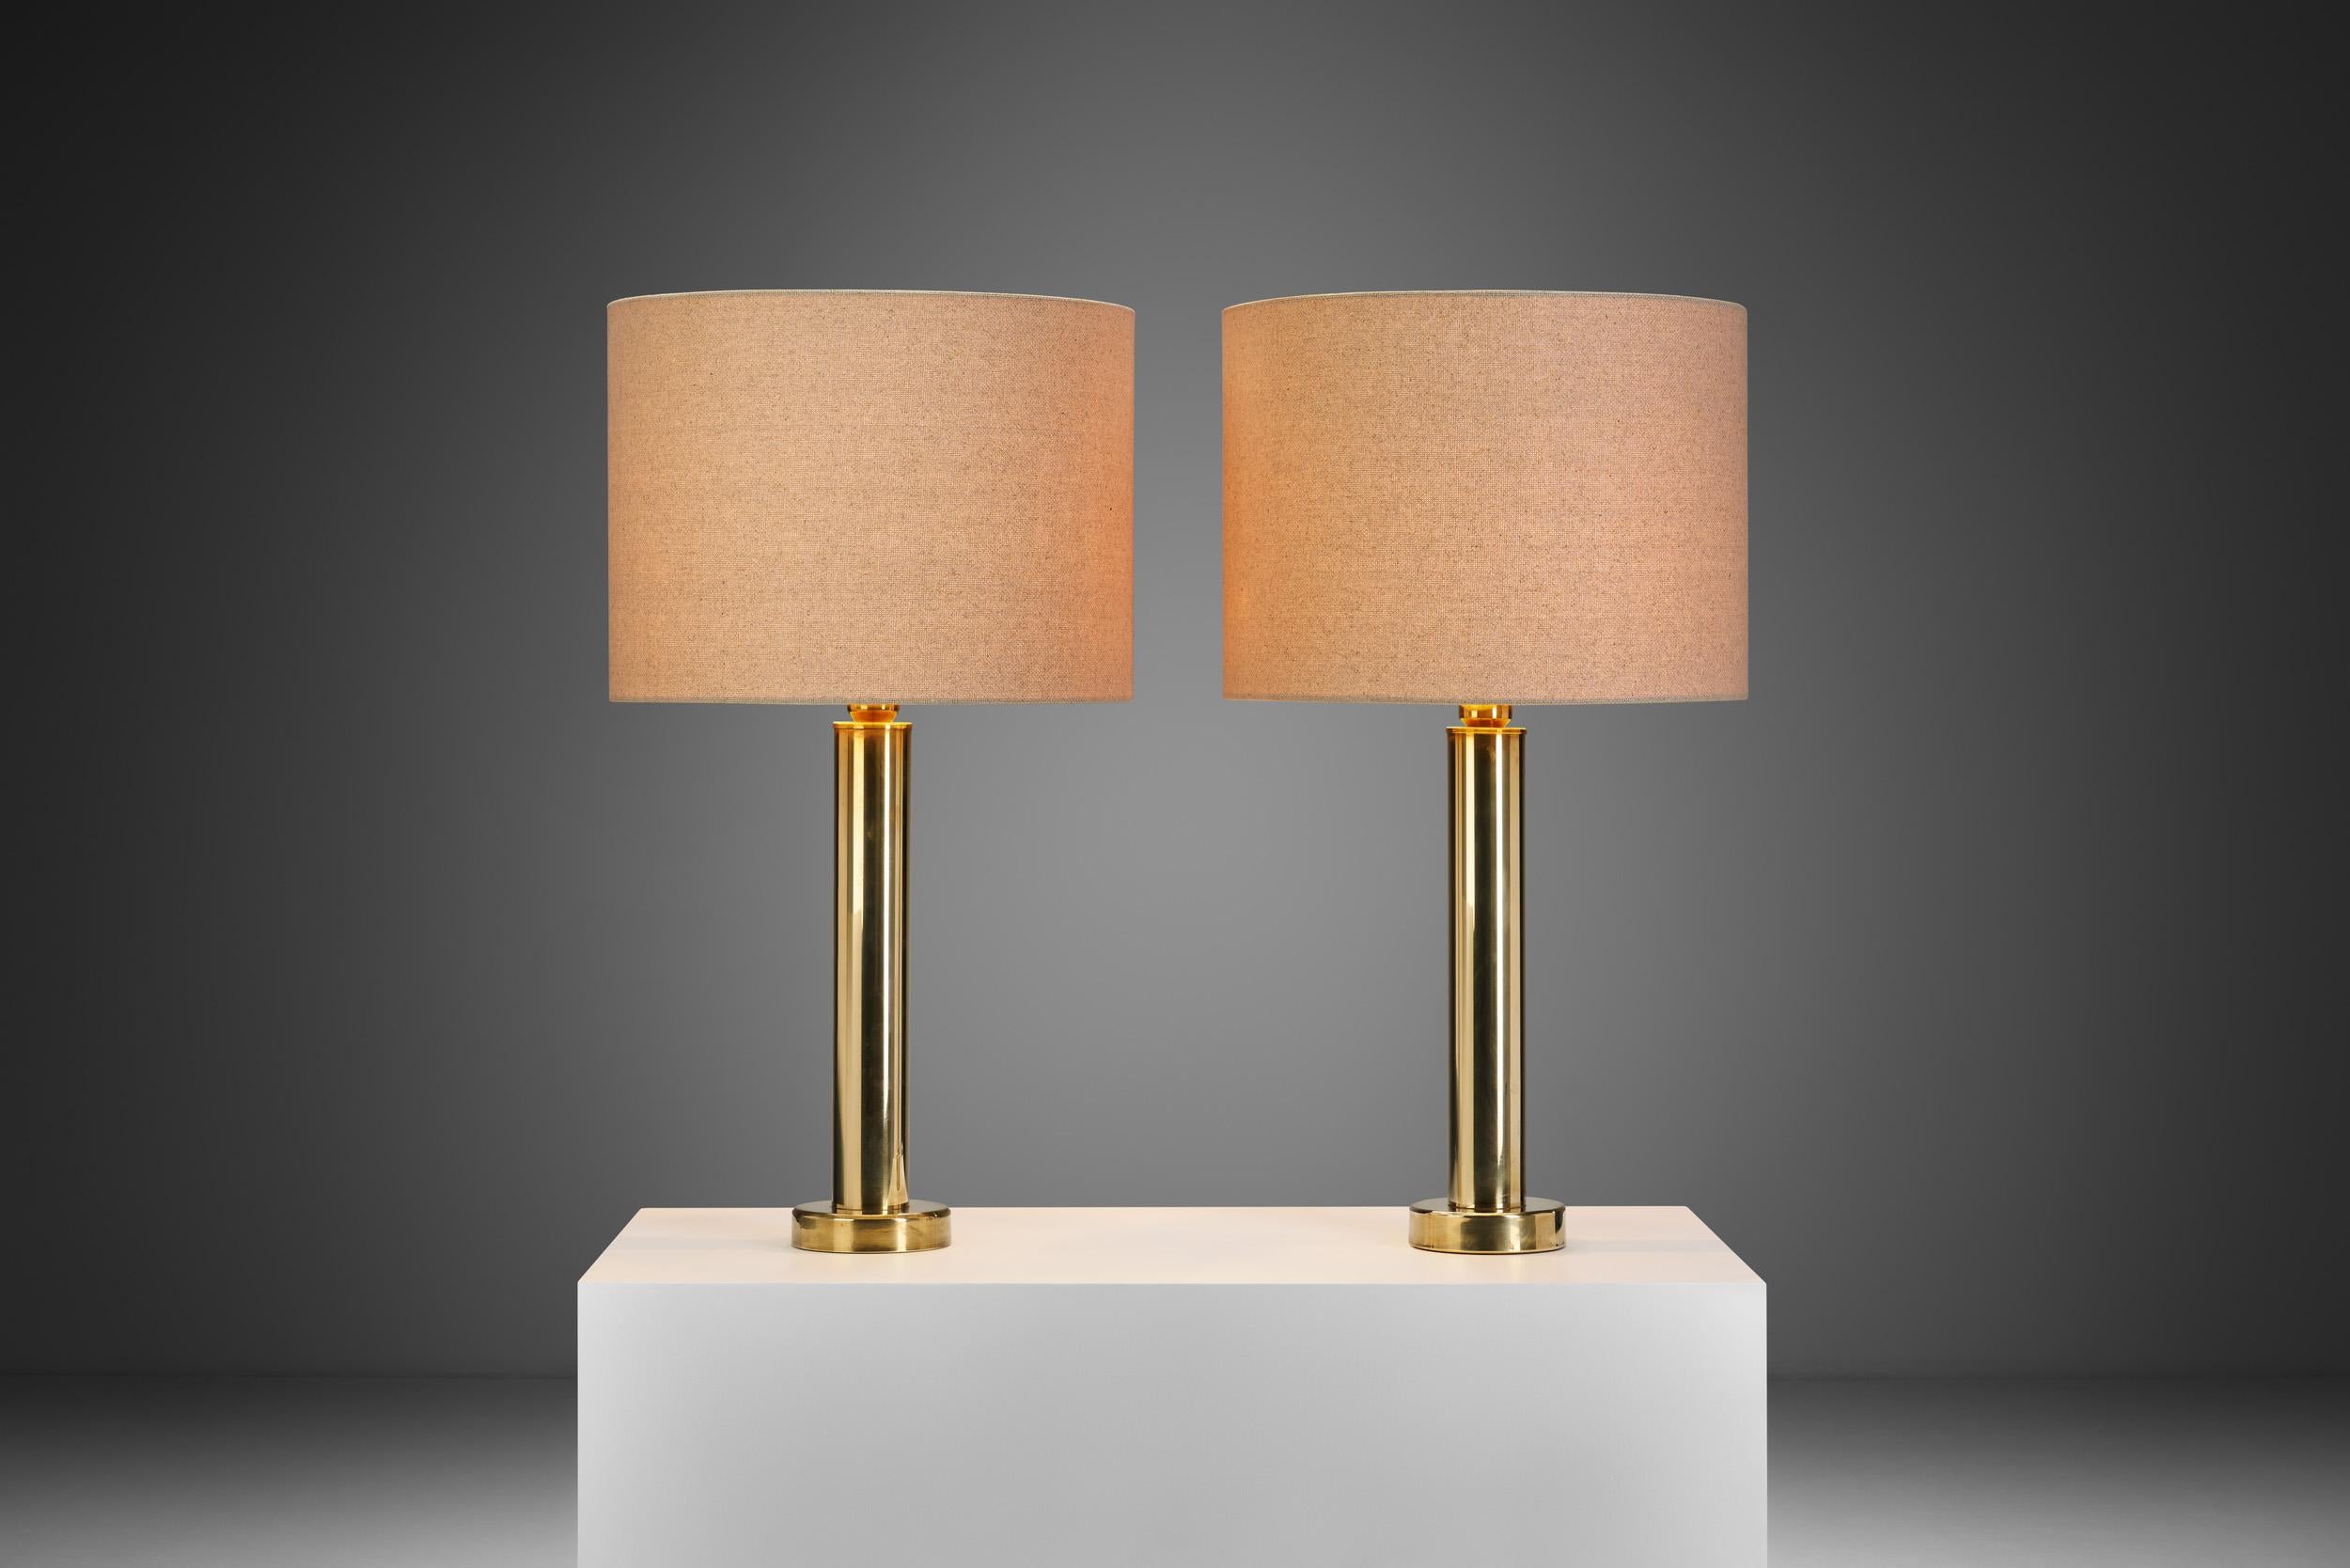 This pair of brass modern table lamps by Elarmatur Kosta is a step into the world of Swedish modern design. Dating from the latter half of the 20th century, it stands as a timeless piece, marked with “SM 21” for authenticity. The design effortlessly